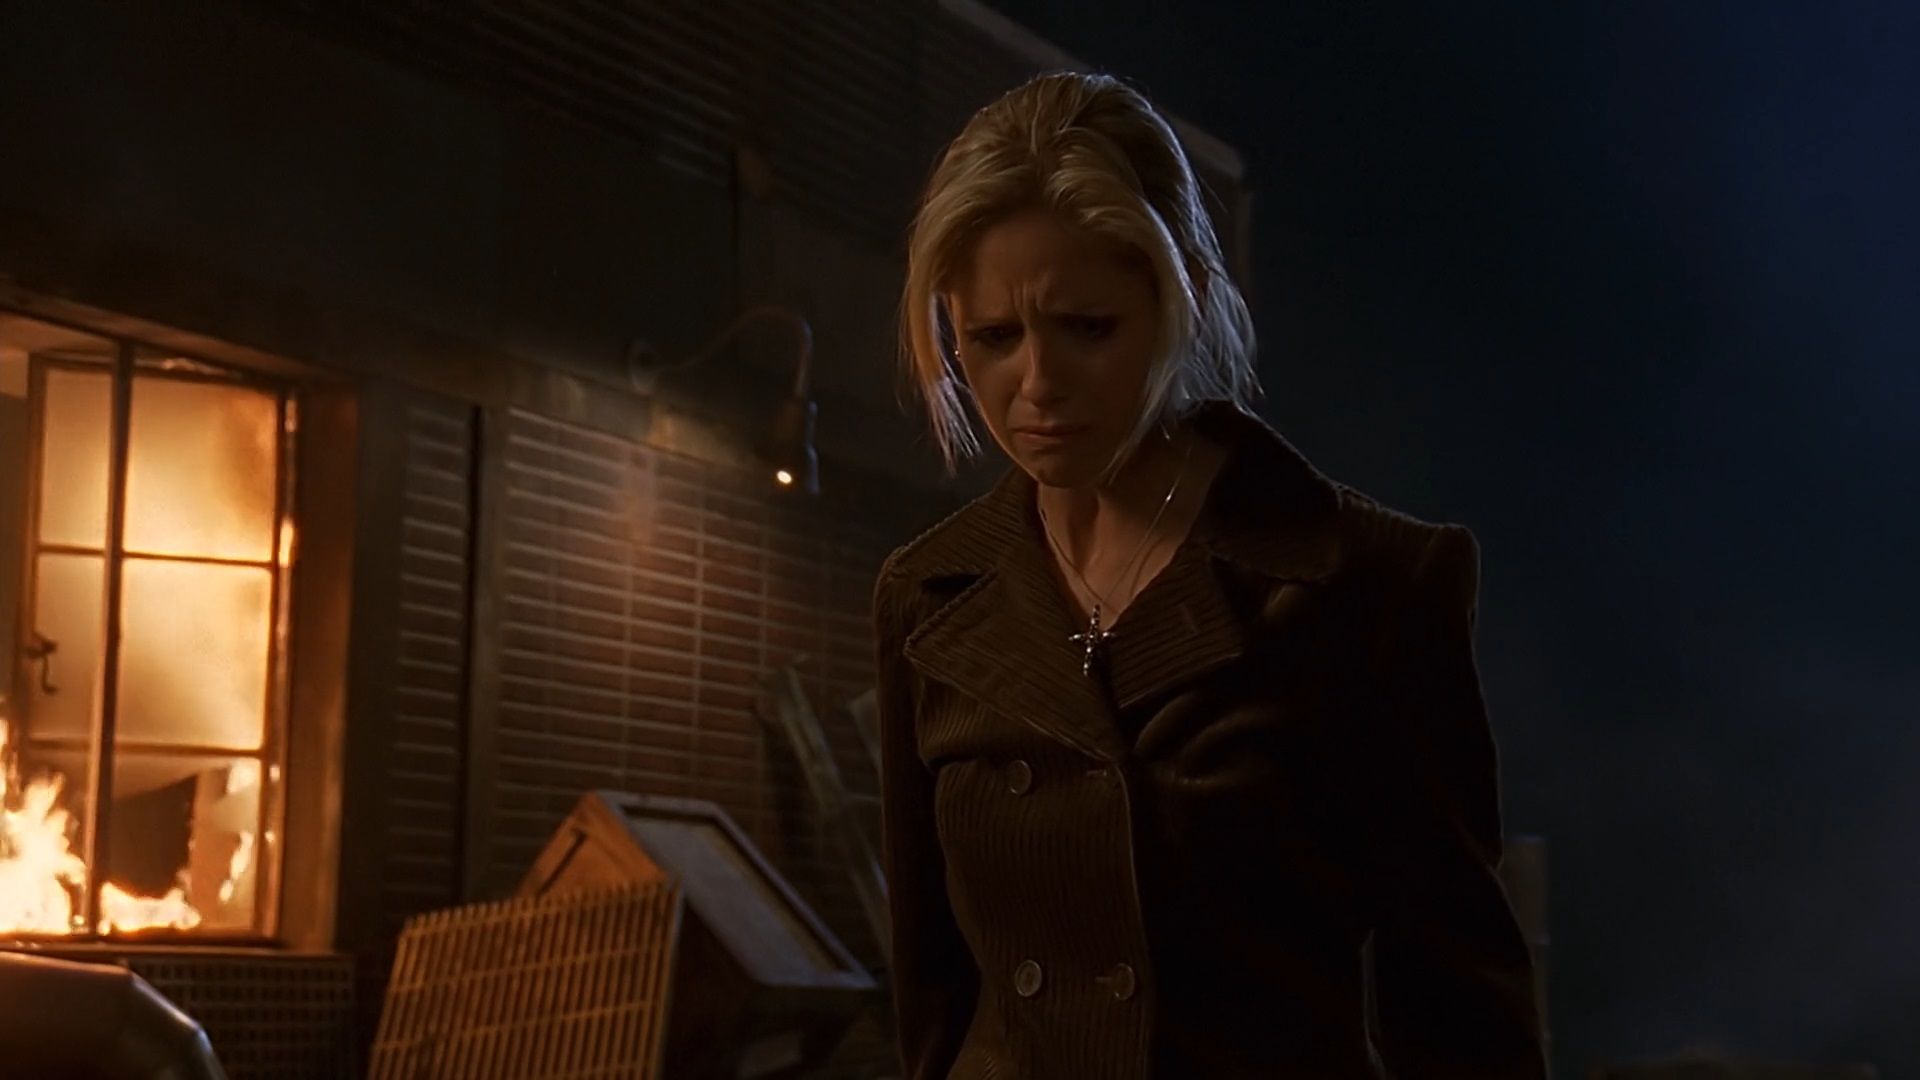 Buffy in the episode "Passion".